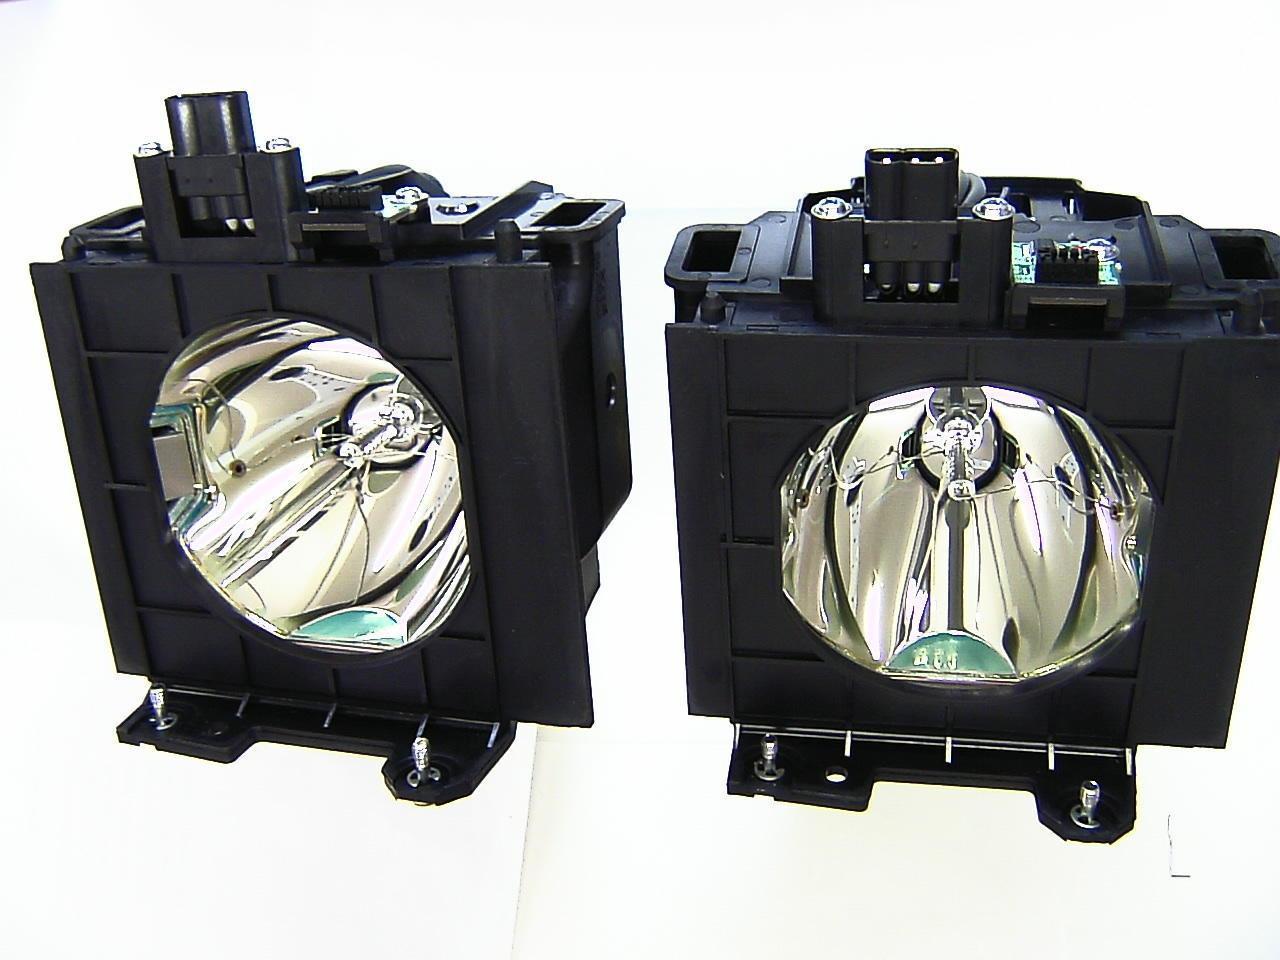 PT-D5100 Panasonic Twin-Pack Projector Lamp Replacement (contains two lamps). Projector Lamp Assembly with High Quality OEM Com